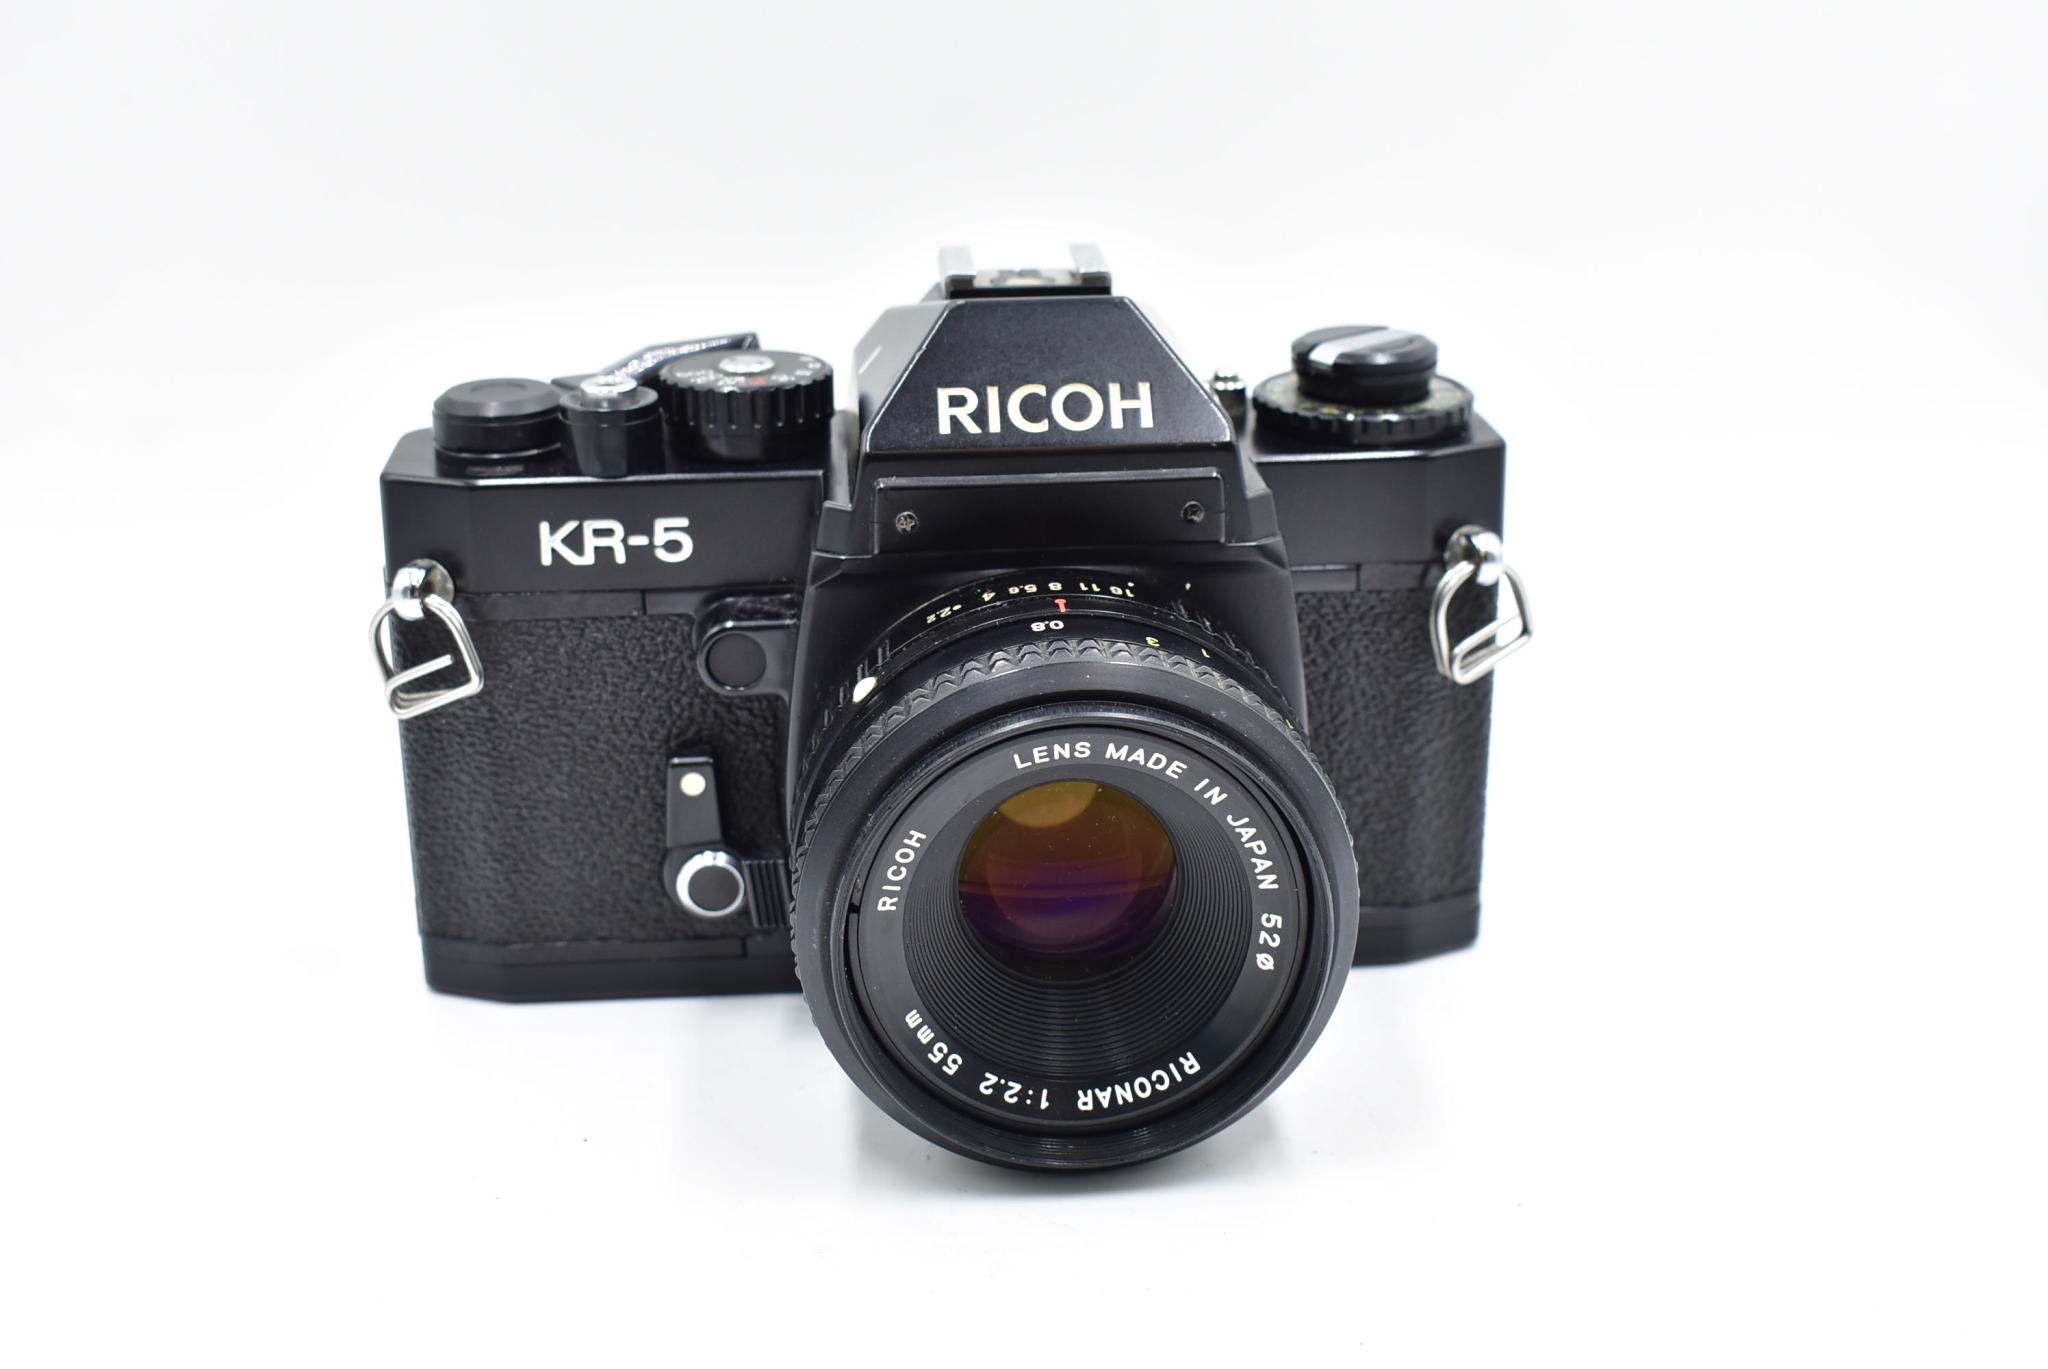 Pre-Owned Ricoh KR-5 w/ 55mm F2.2 35mm Film Camera